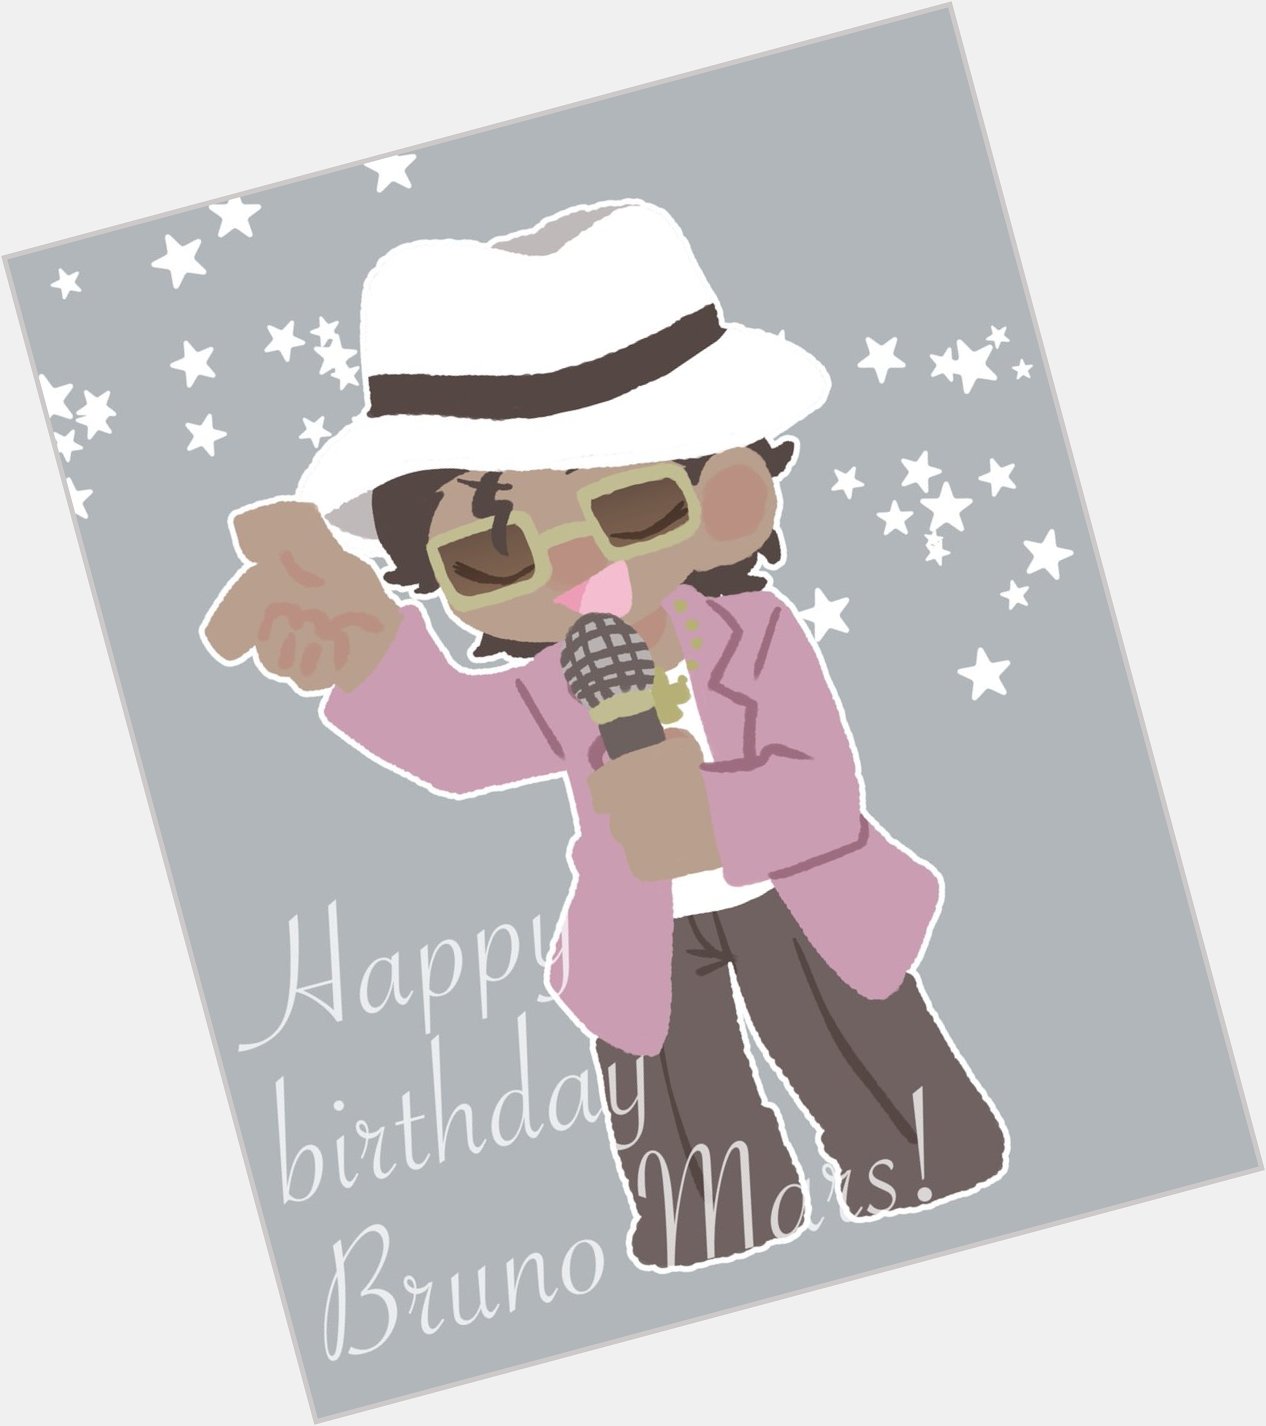 Happy  birthday Bruno Mars!

I love your work! I will continue to support you!  